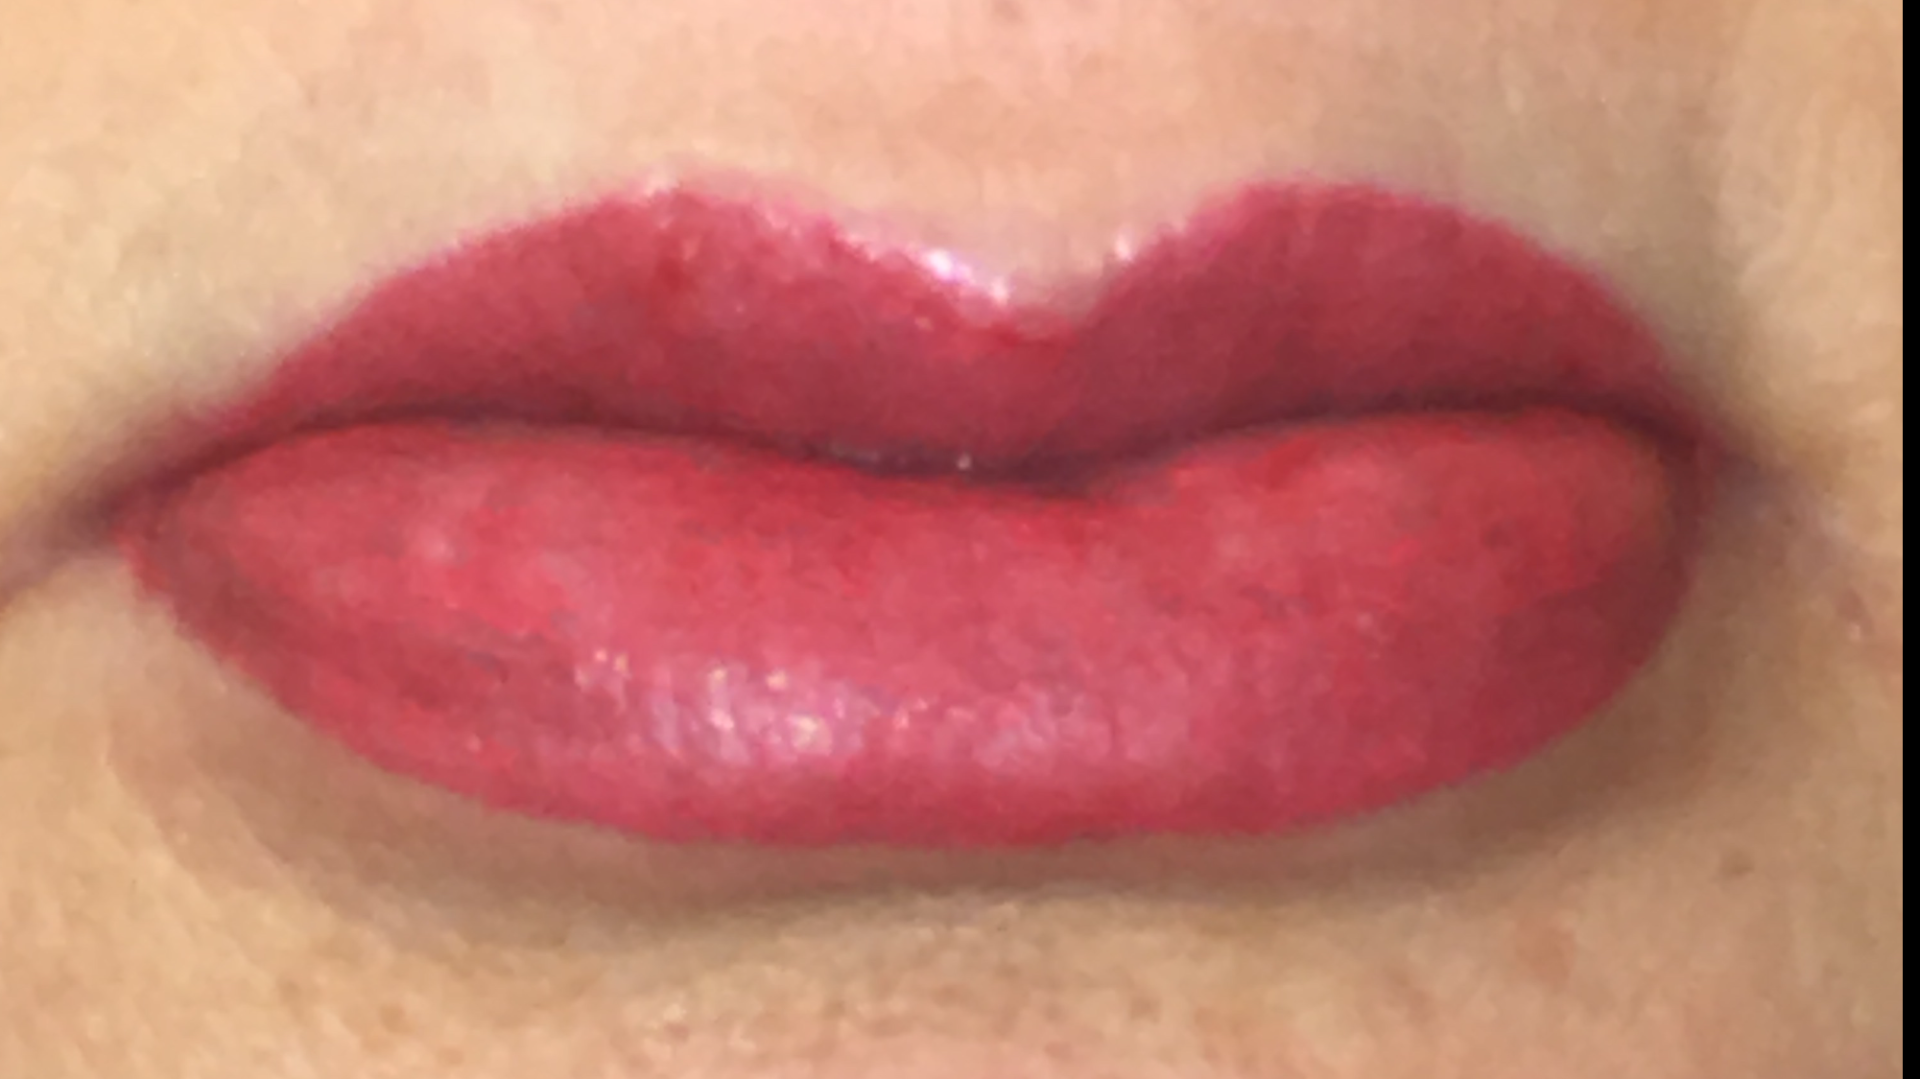 Full lip color - after